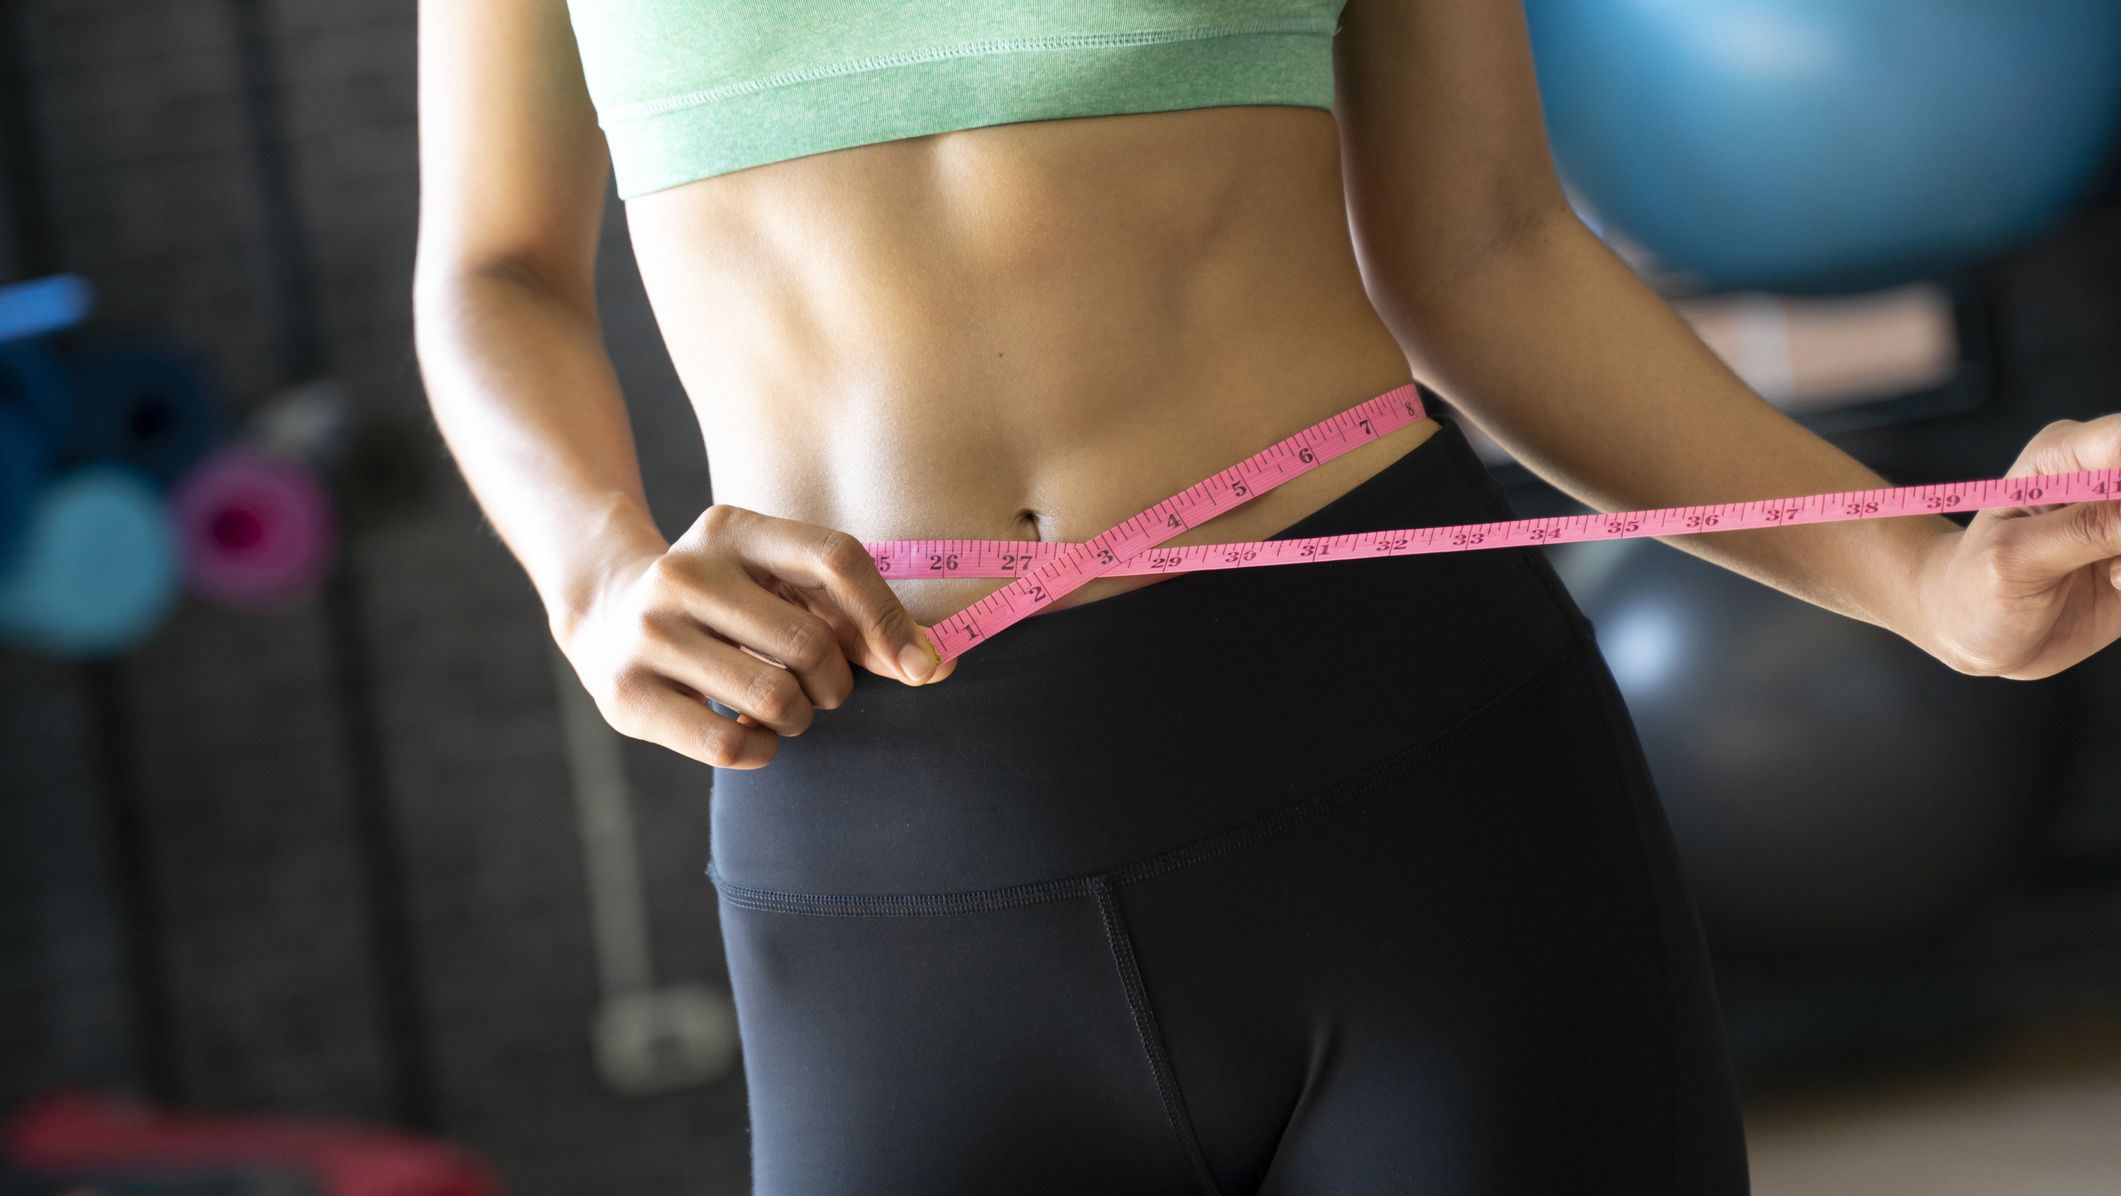 Where Do You Lose Weight First? Weight Loss Tips From Doctors